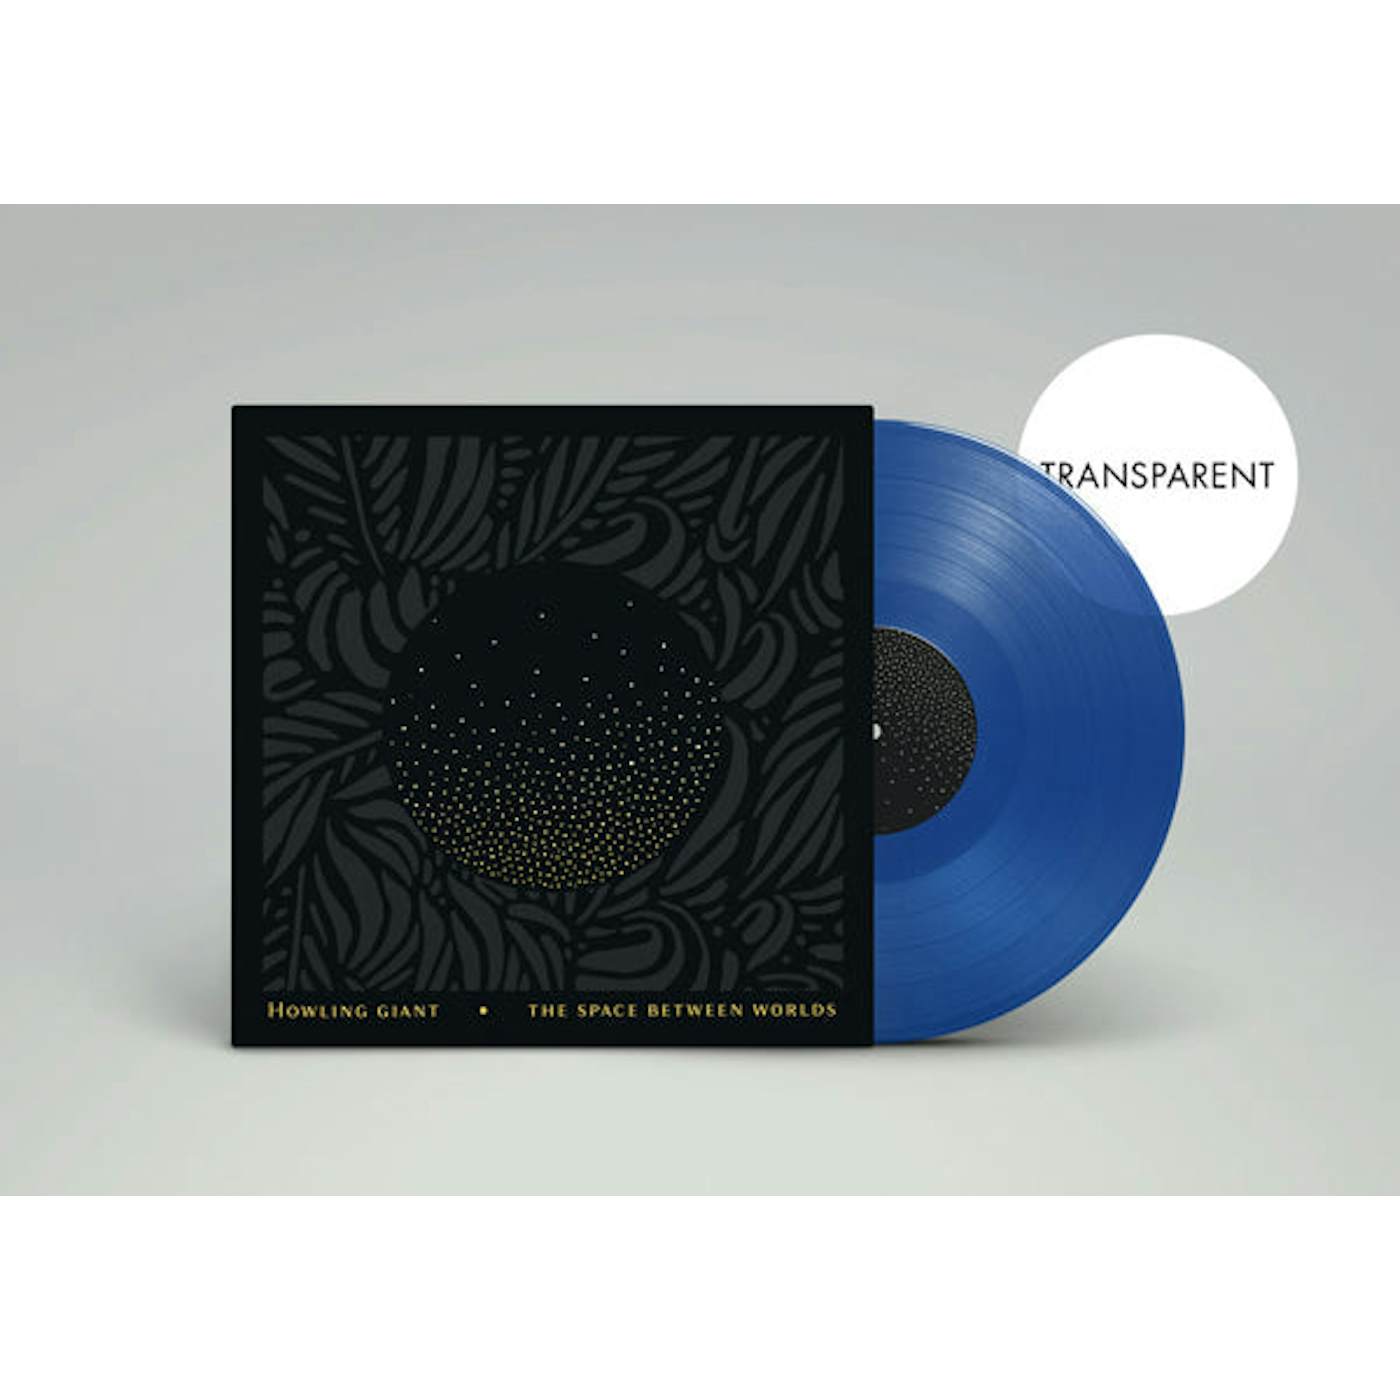 Howling Giant LP - The Space Between Worlds (Transparent Blue Vinyl)